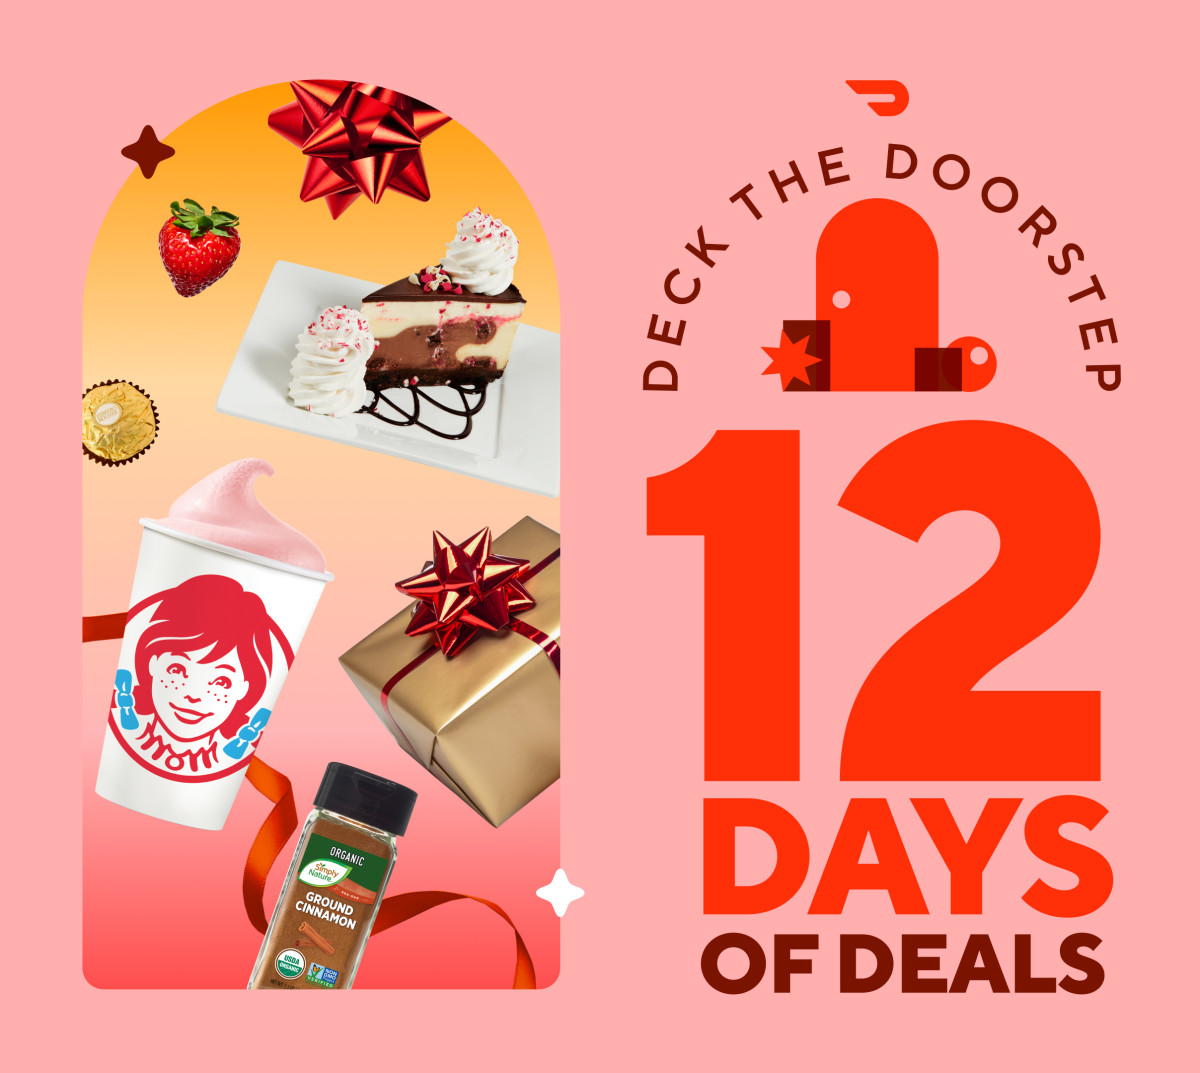 Share, Request & Trade YOUR Gift Cards, Coupons & Promo Codes (11/29/20)